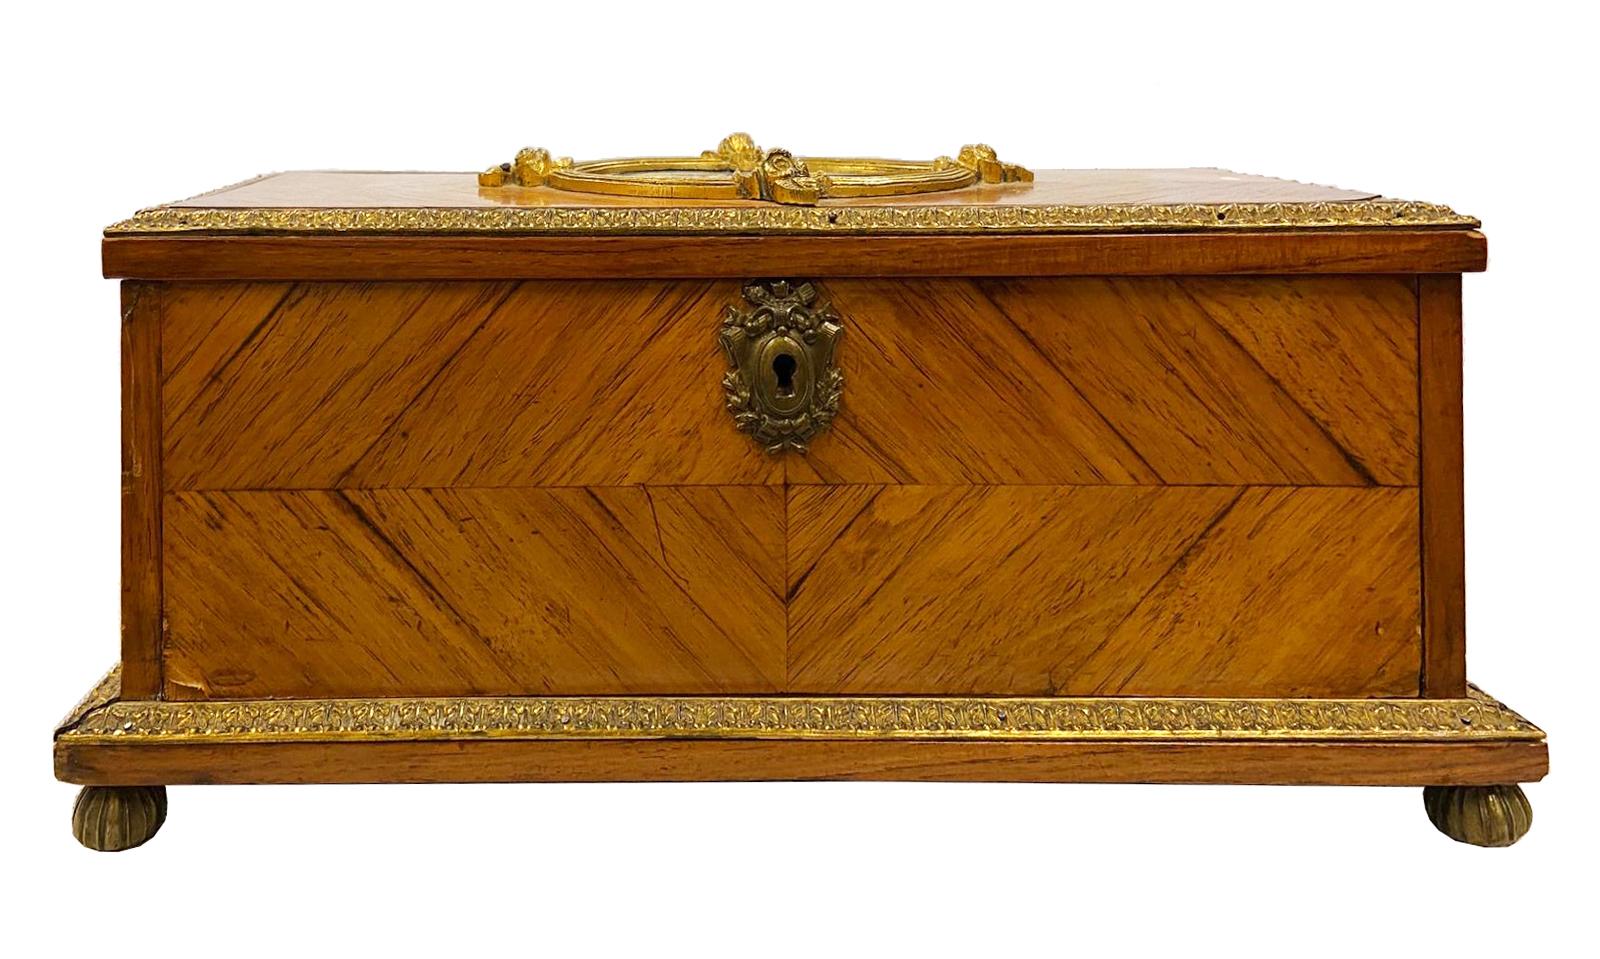 Louis XVI French 19th Century 'Sevres' Porcelain Mounted Casket For Sale